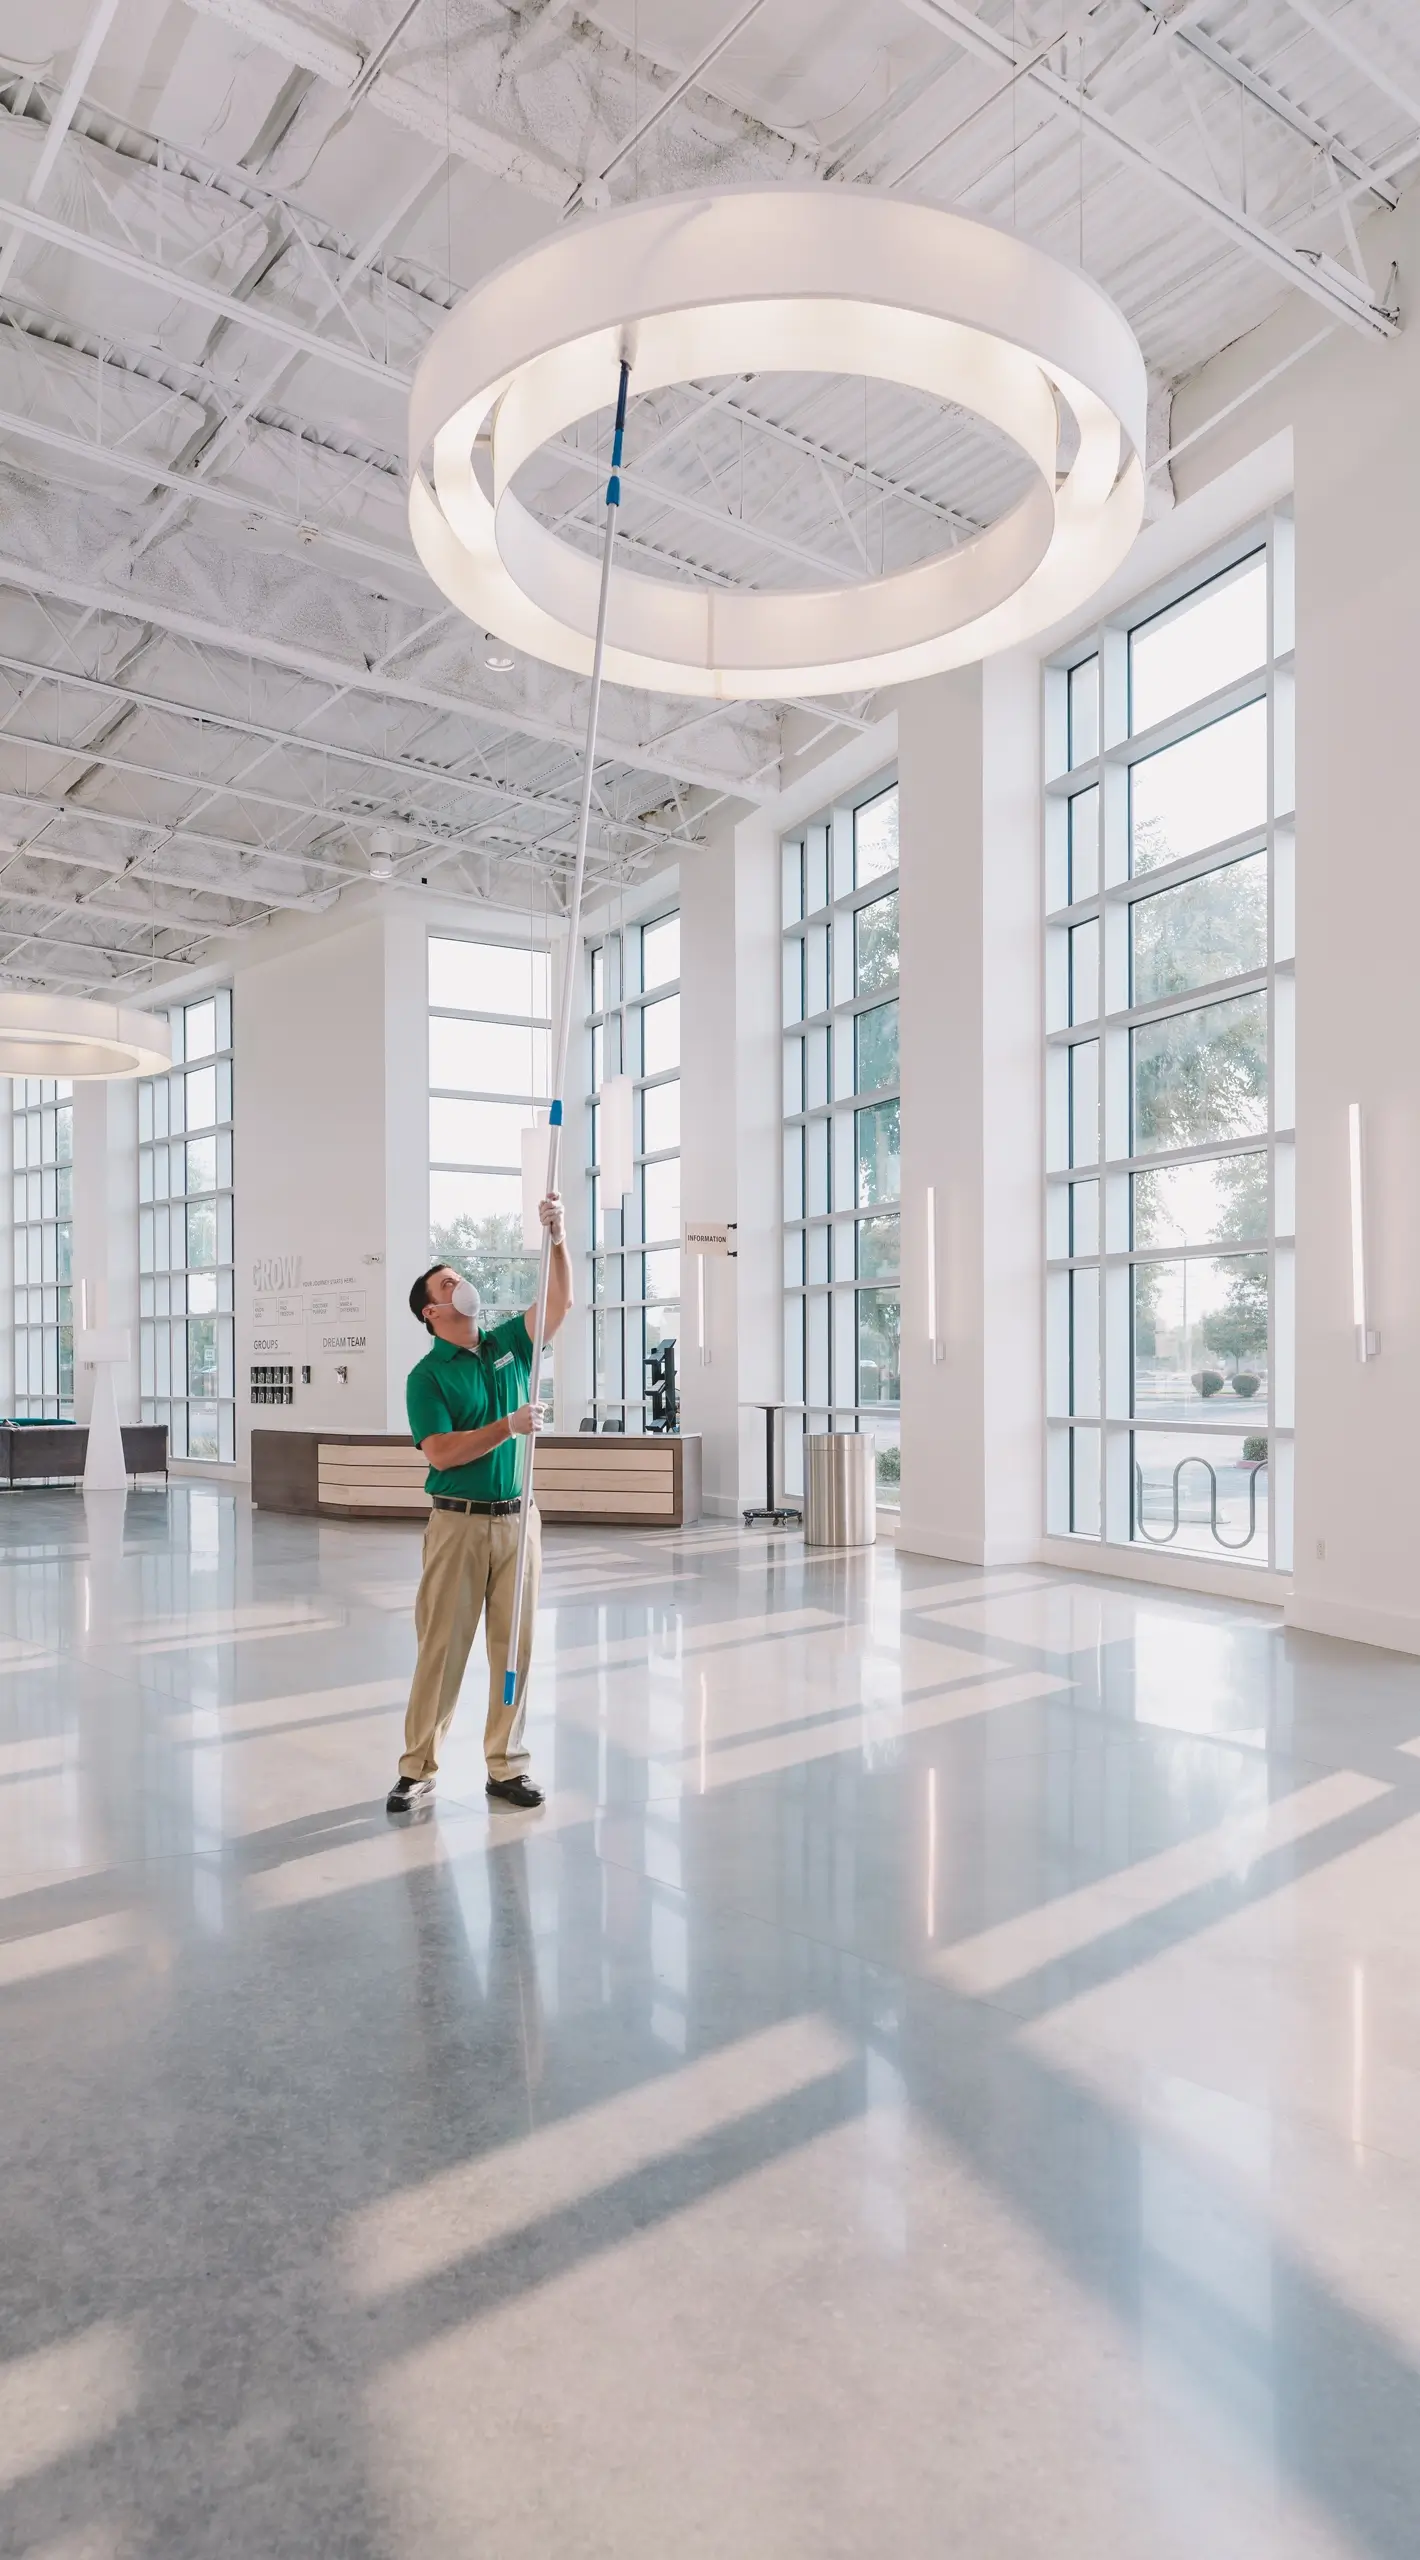 professional commercial cleaner dusting high ceiling lamp in a lobby early during sunrise